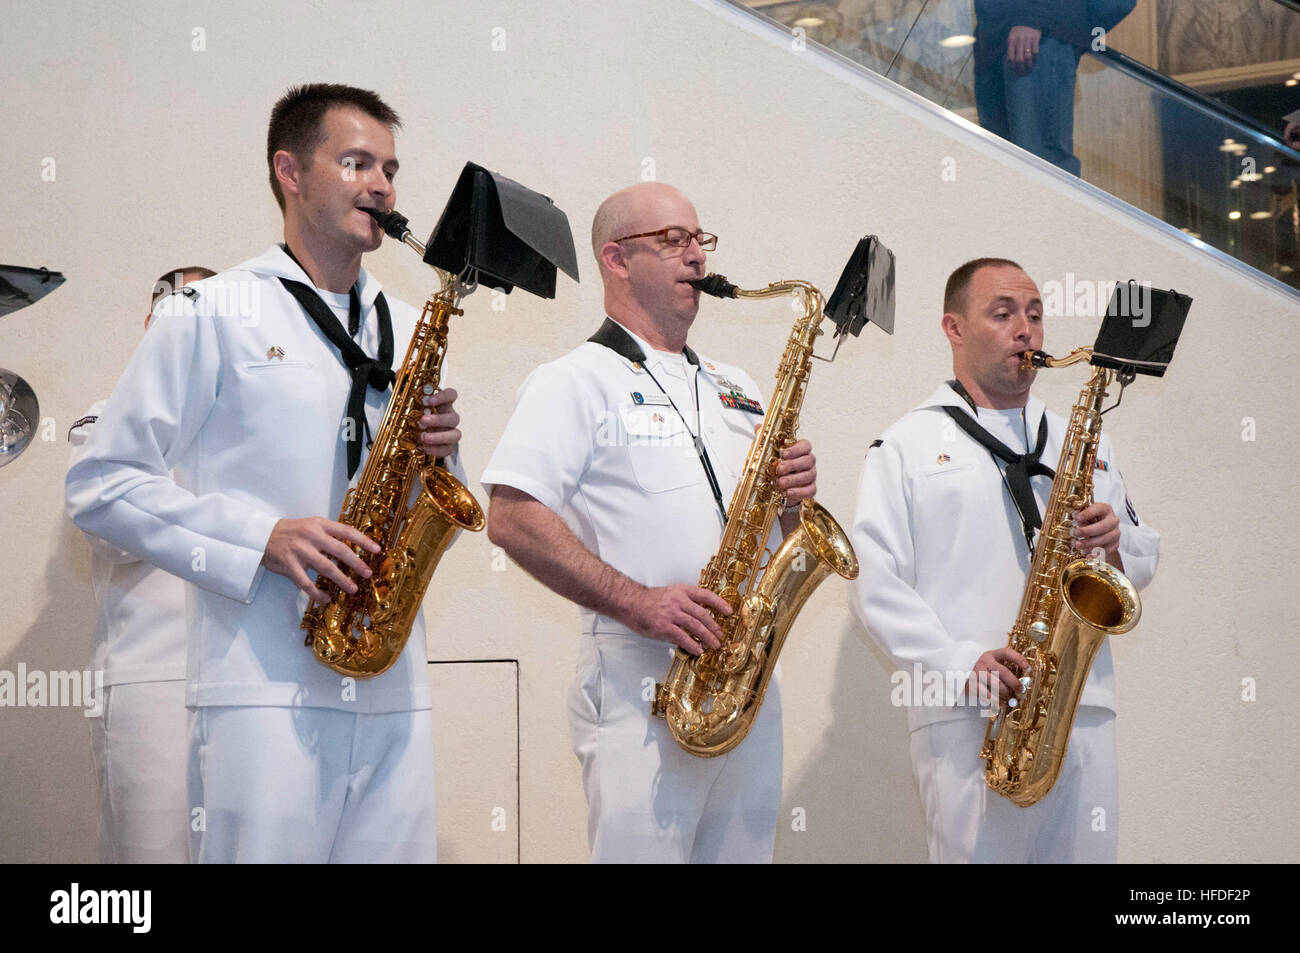 120528-N-TC096-691 BANGKOK (May 27, 2012) - From left, Musician Seaman Brandon Kies, Chief Musician Nicholas Flores and  Musician 2nd Class David Drescher of the U.S. 7th Fleet Band Far East Edition, play the saxophone during a performance at the Terminal 21 Mall in Bangkok. The 7th Fleet Band is embarked on board the flagship USS Blue Ridge and is currently in Thailand for a port visit.(U.S. Navy photo by Mass Communication Specialist 3rd Class Colin M. Sheridan/Released) US 7th Fleet band performs in Bangkok 120528-N-TC096-691 Stock Photo